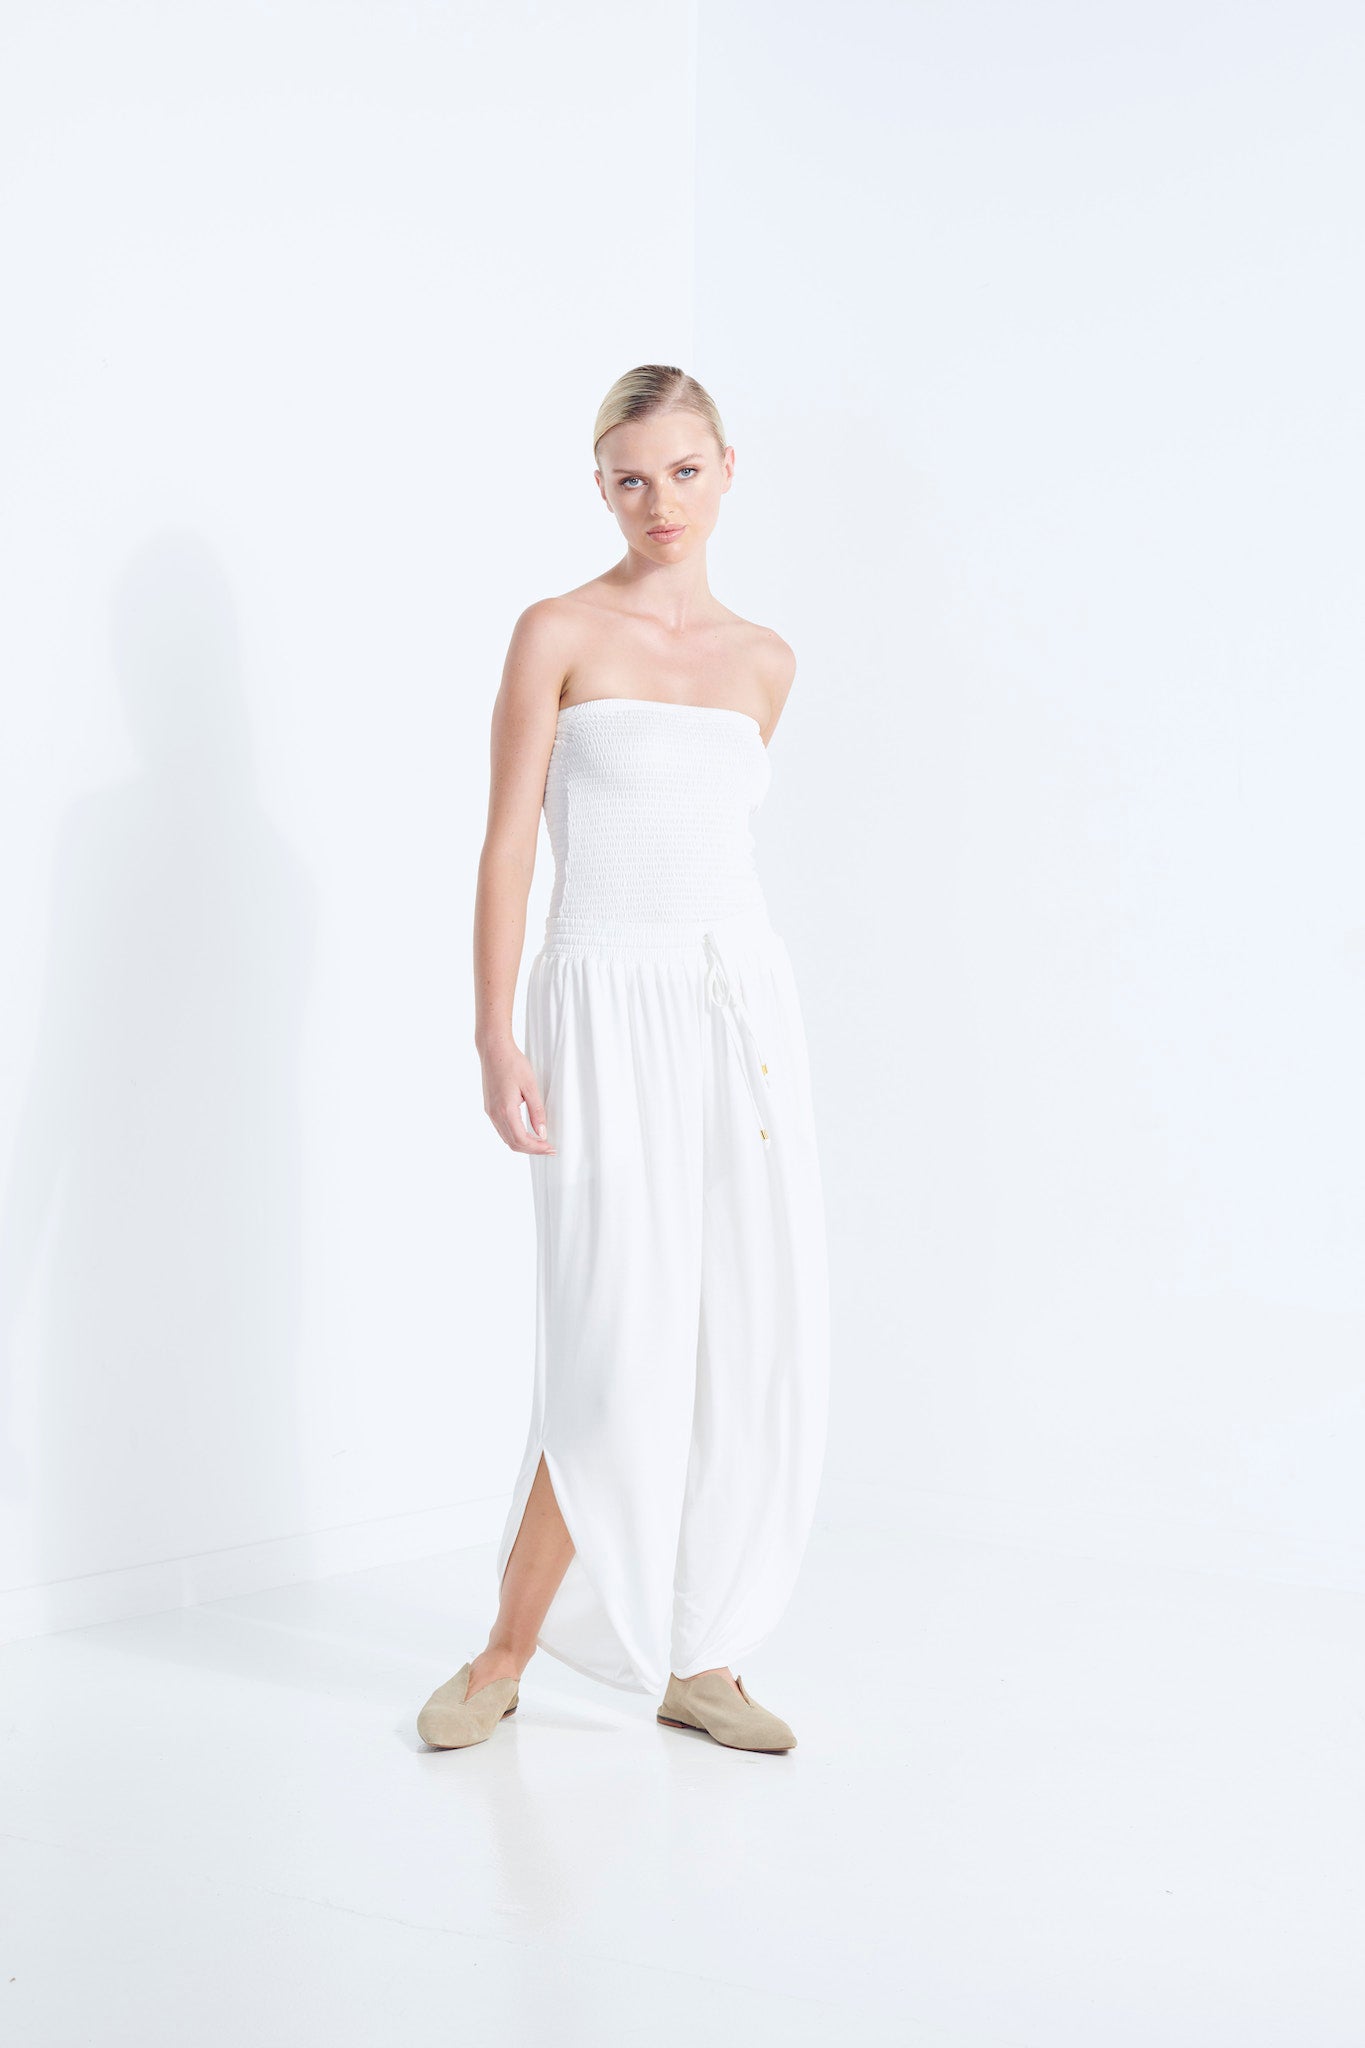 BELU PANT DEW MILKY WHITE LUXURY LOUNGEWEAR RELAXED KNIT PANTS WITH ELASTIC WAIST AND PETAL HEM SIDE FRONT VIEW